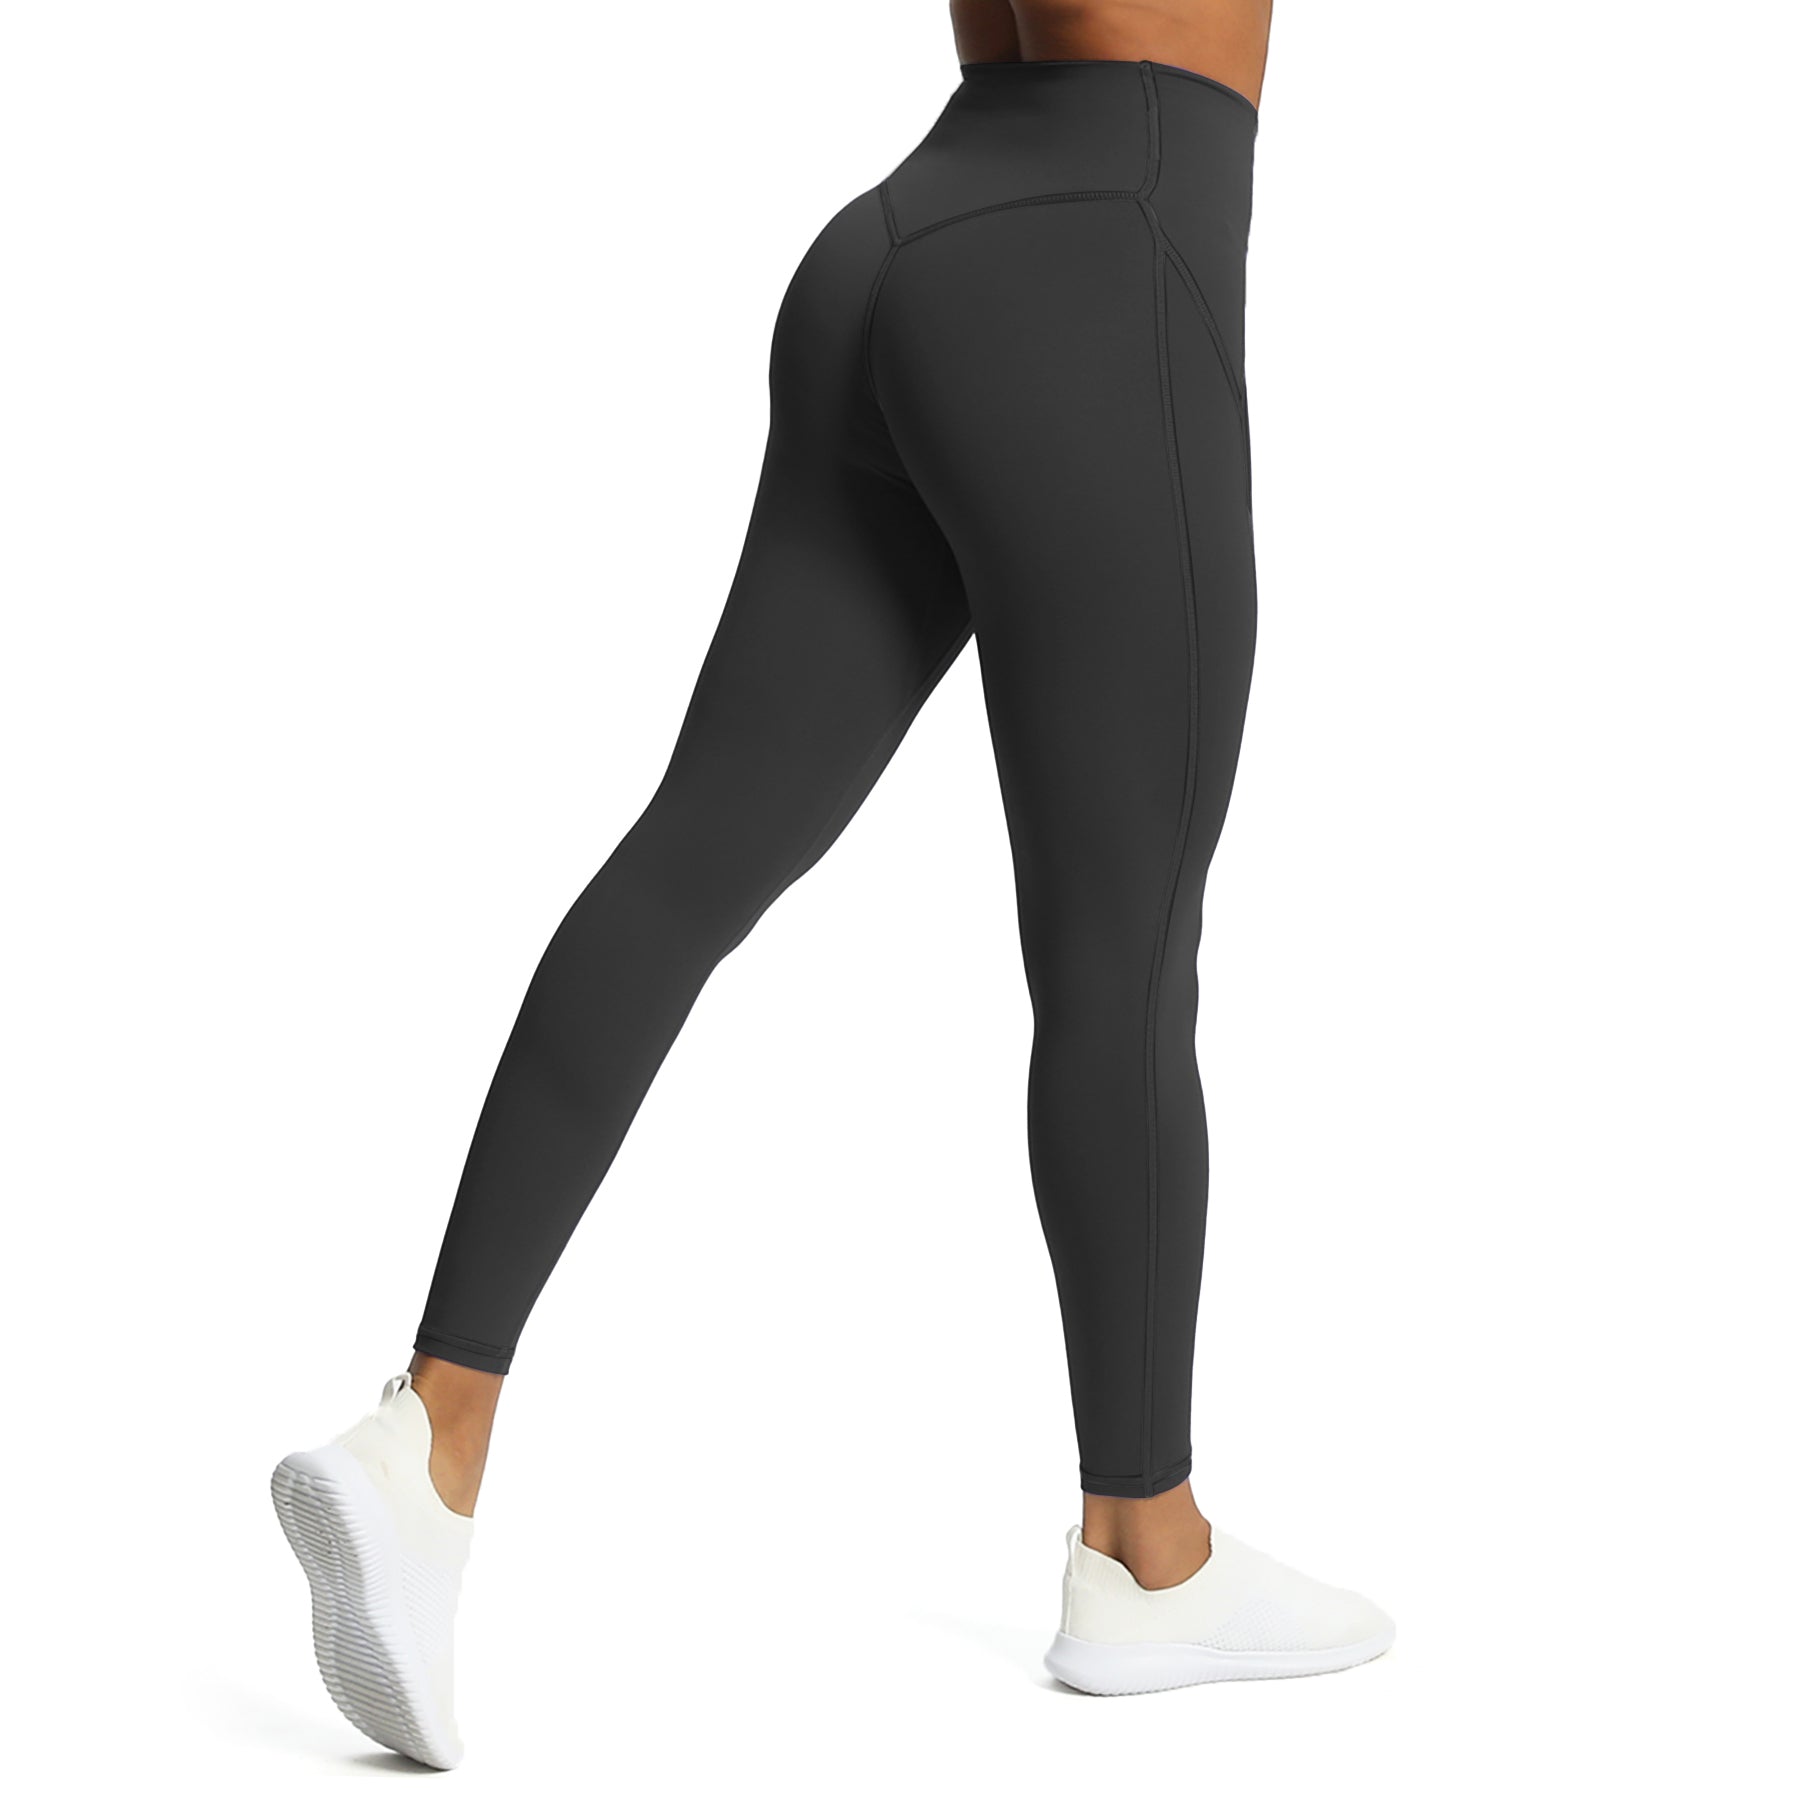 Aoxjox "Lexi Lined" Leggings